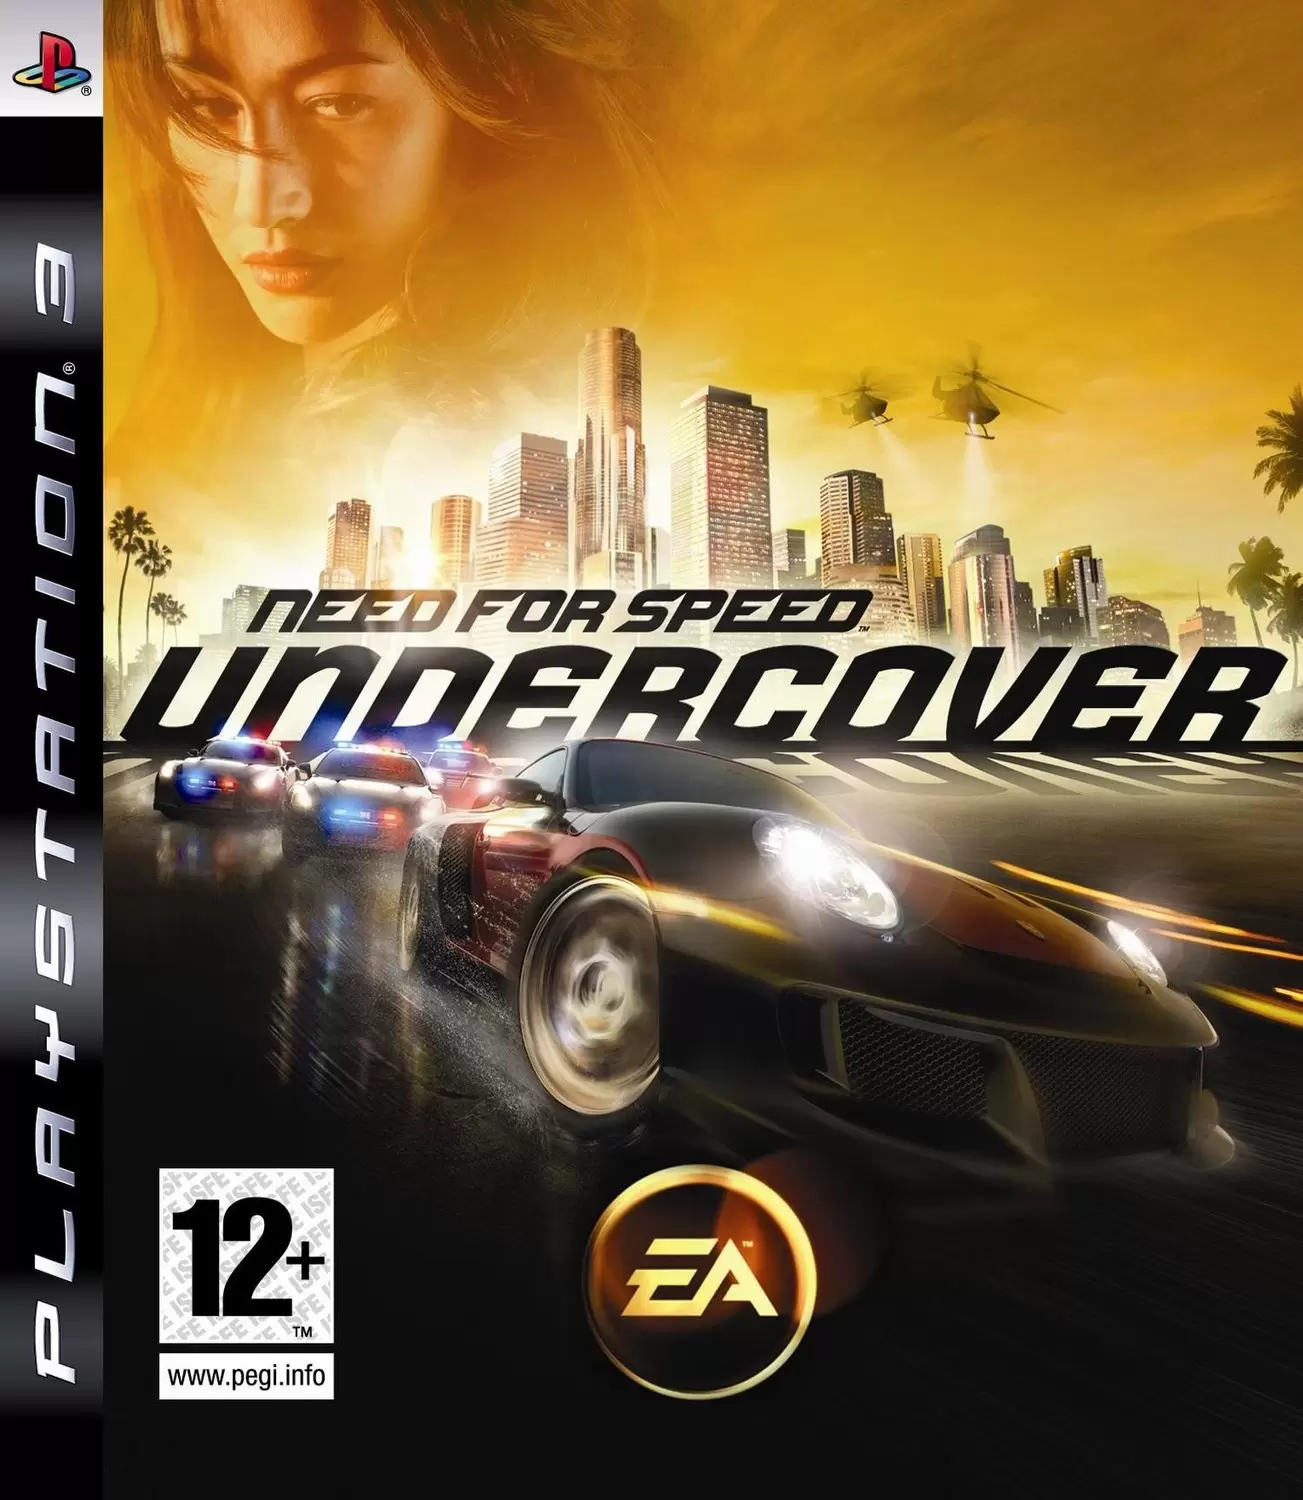 PS3 Games - Need for Speed: Undercover